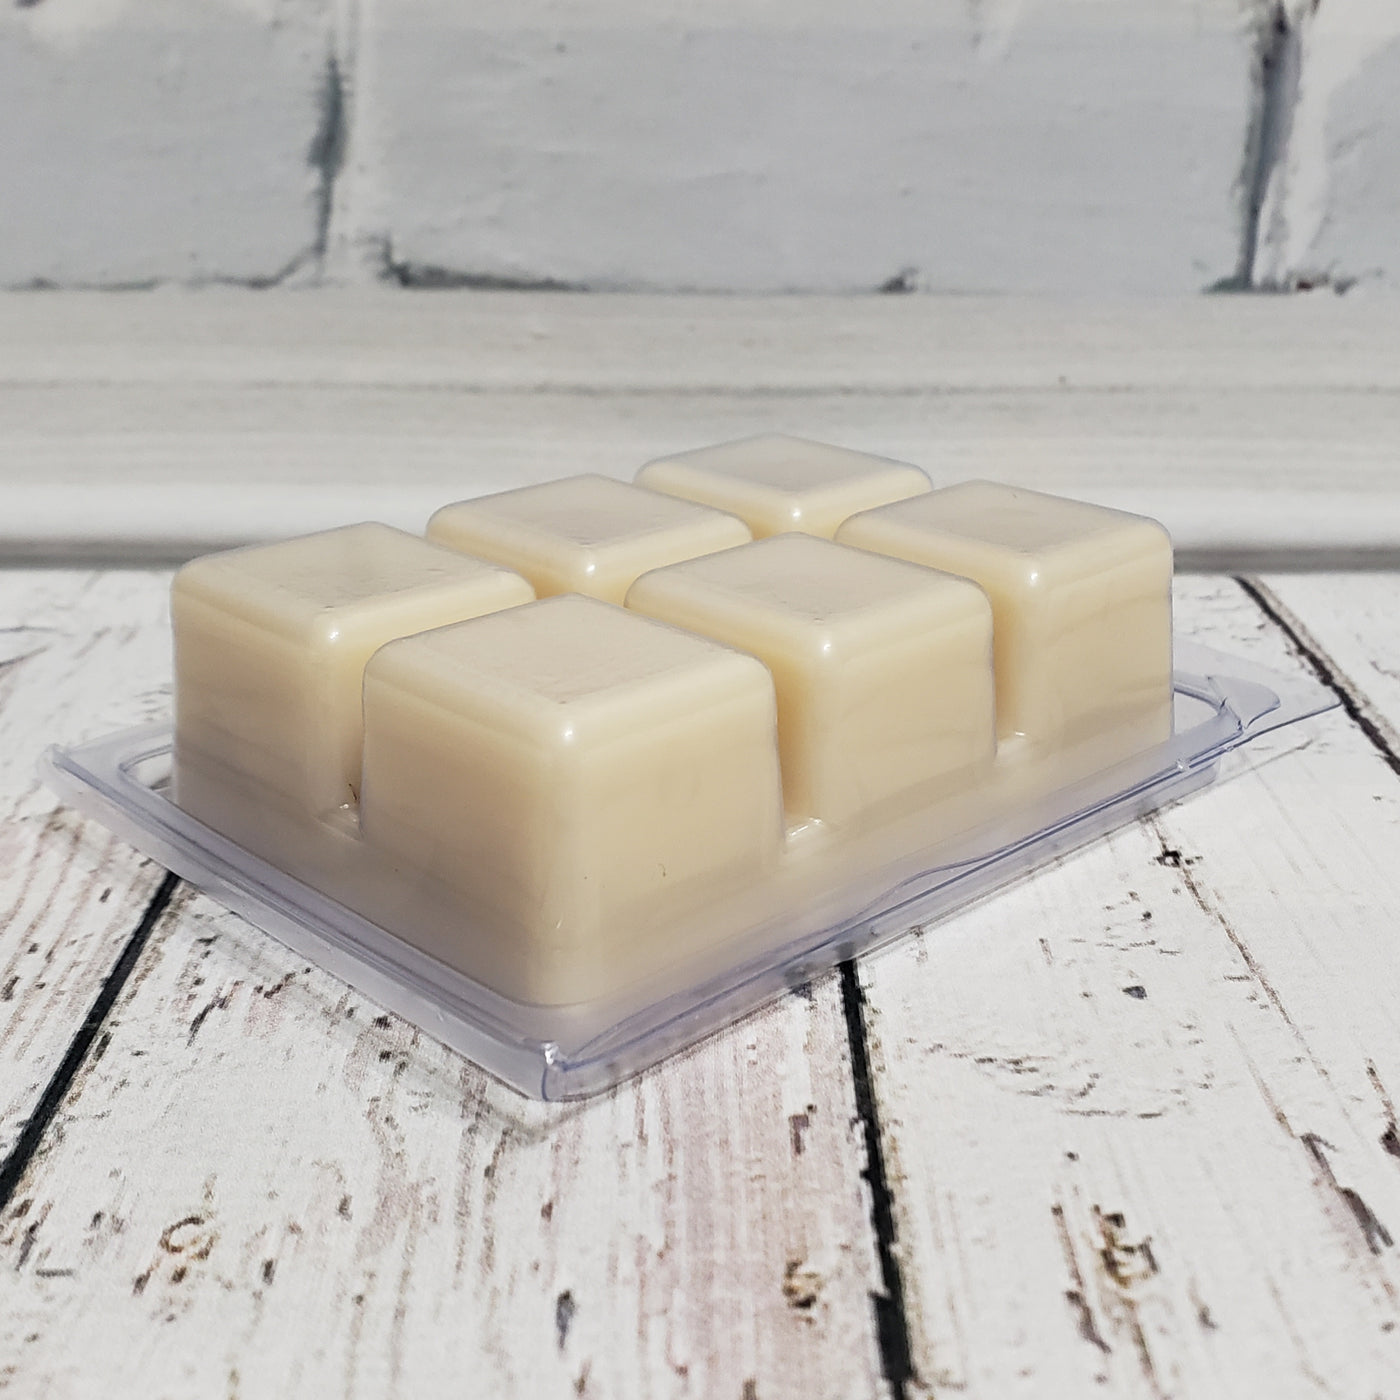 Country Meadow Wax Melts